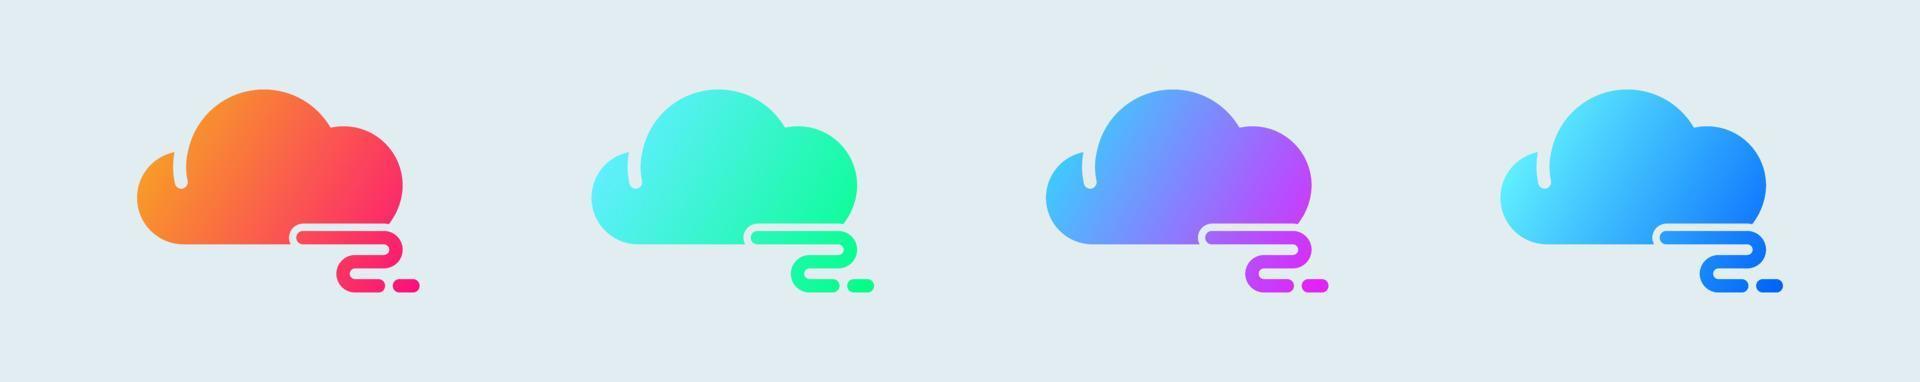 Foggy solid icon in gradient colors. Weather signs vector illustration.